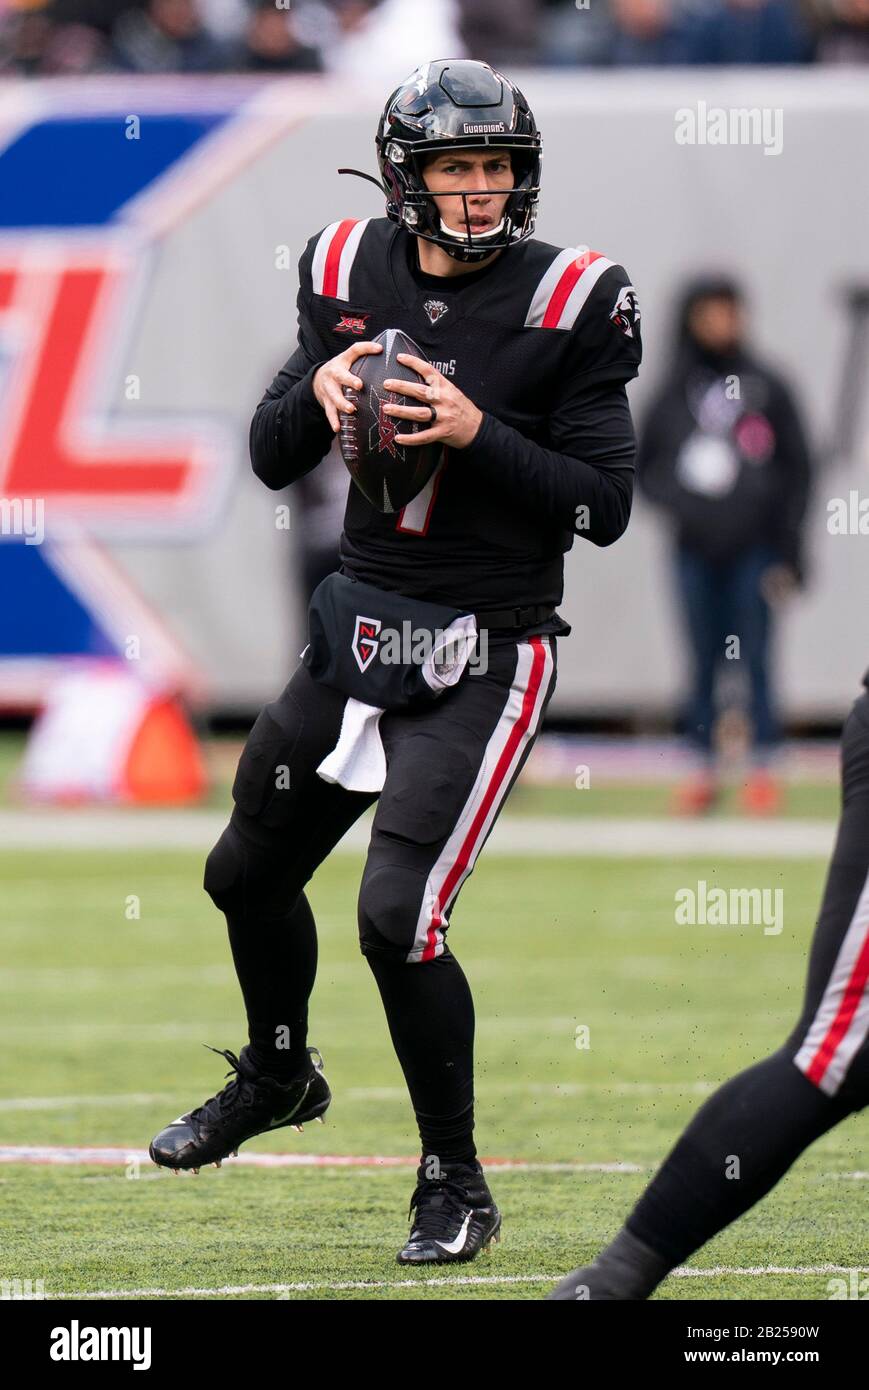 East Rutherford, New Jersey, USA. 29th Feb, 2020. New York Guardians  quarterback Luis Perez (7) in action during the XFL game against the Los  Angeles Wildcats at MetLife Stadium in East Rutherford